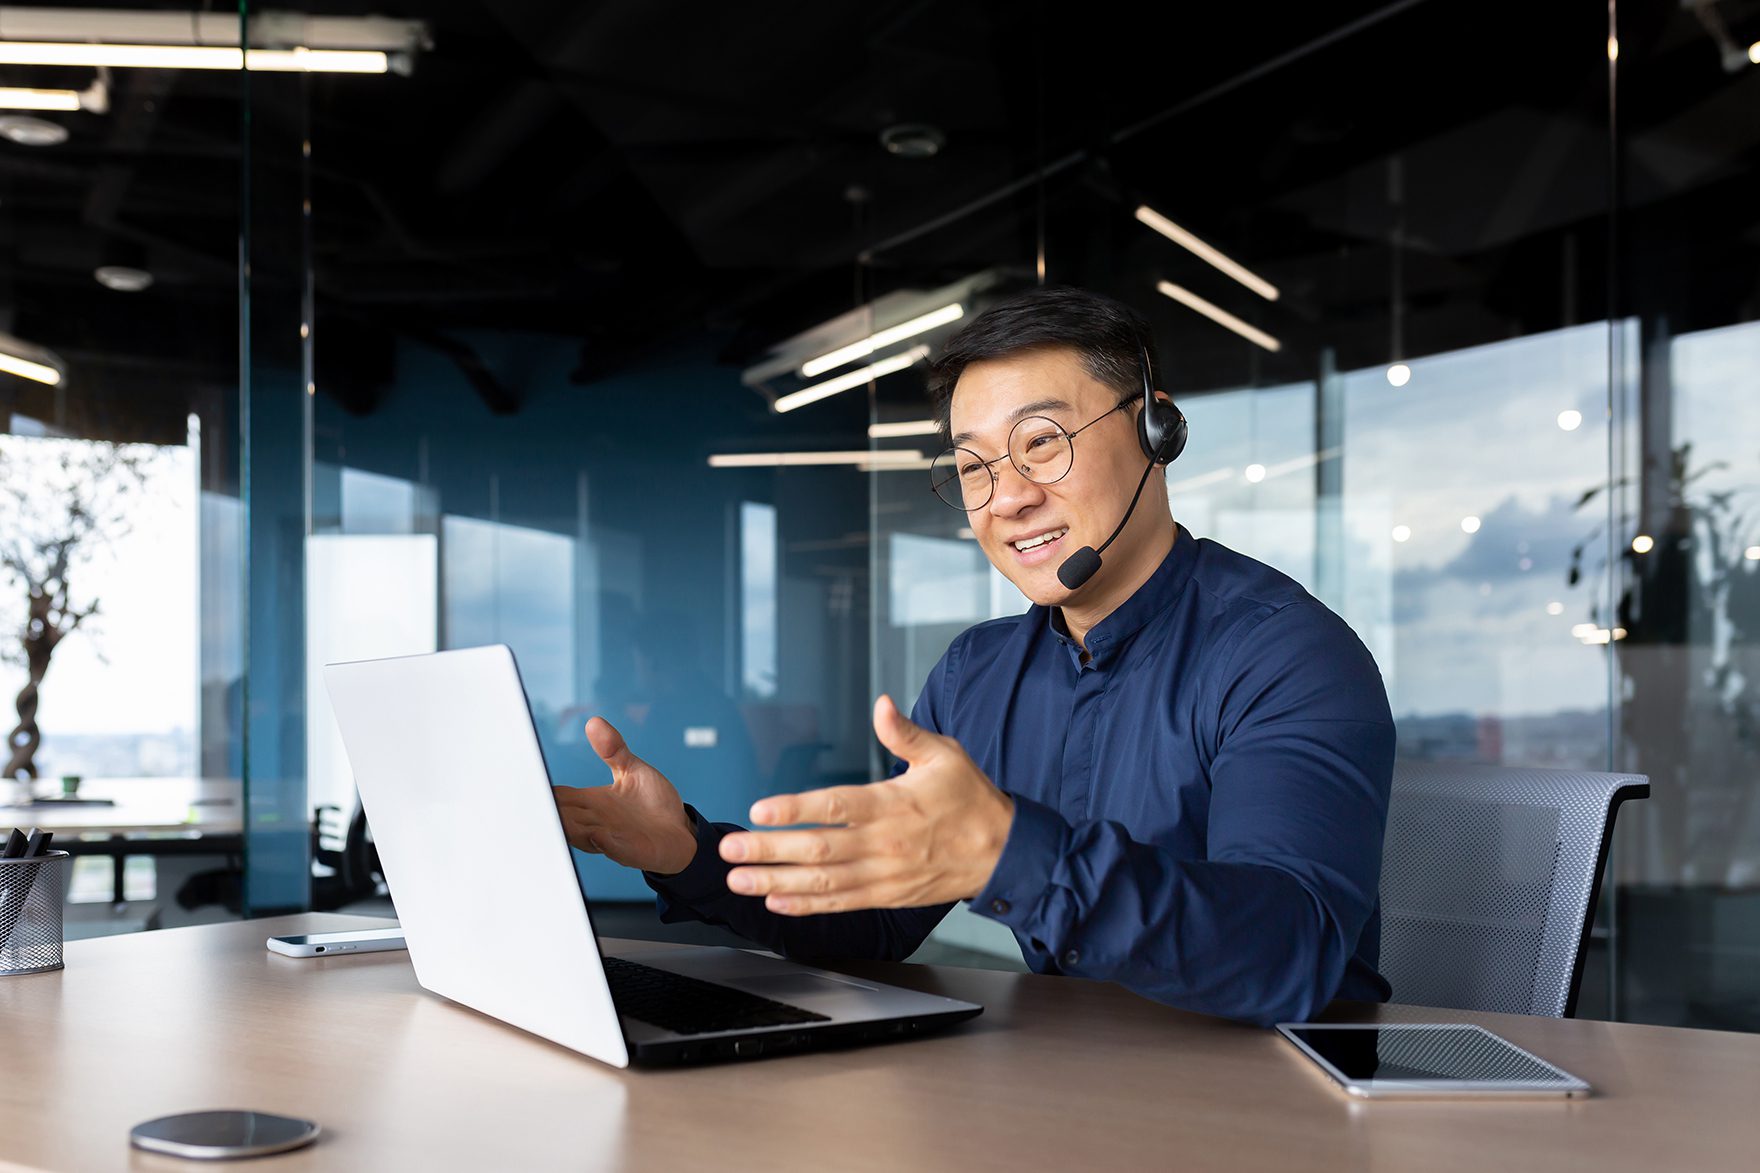 Asian With A Headset Is Talking On Video Call, Man Inside Office Smiling And Gesturing Joyfully In An Online Meeting, A Businessman Is Telling His Colleagues, A Customer Service Tech Support Worker